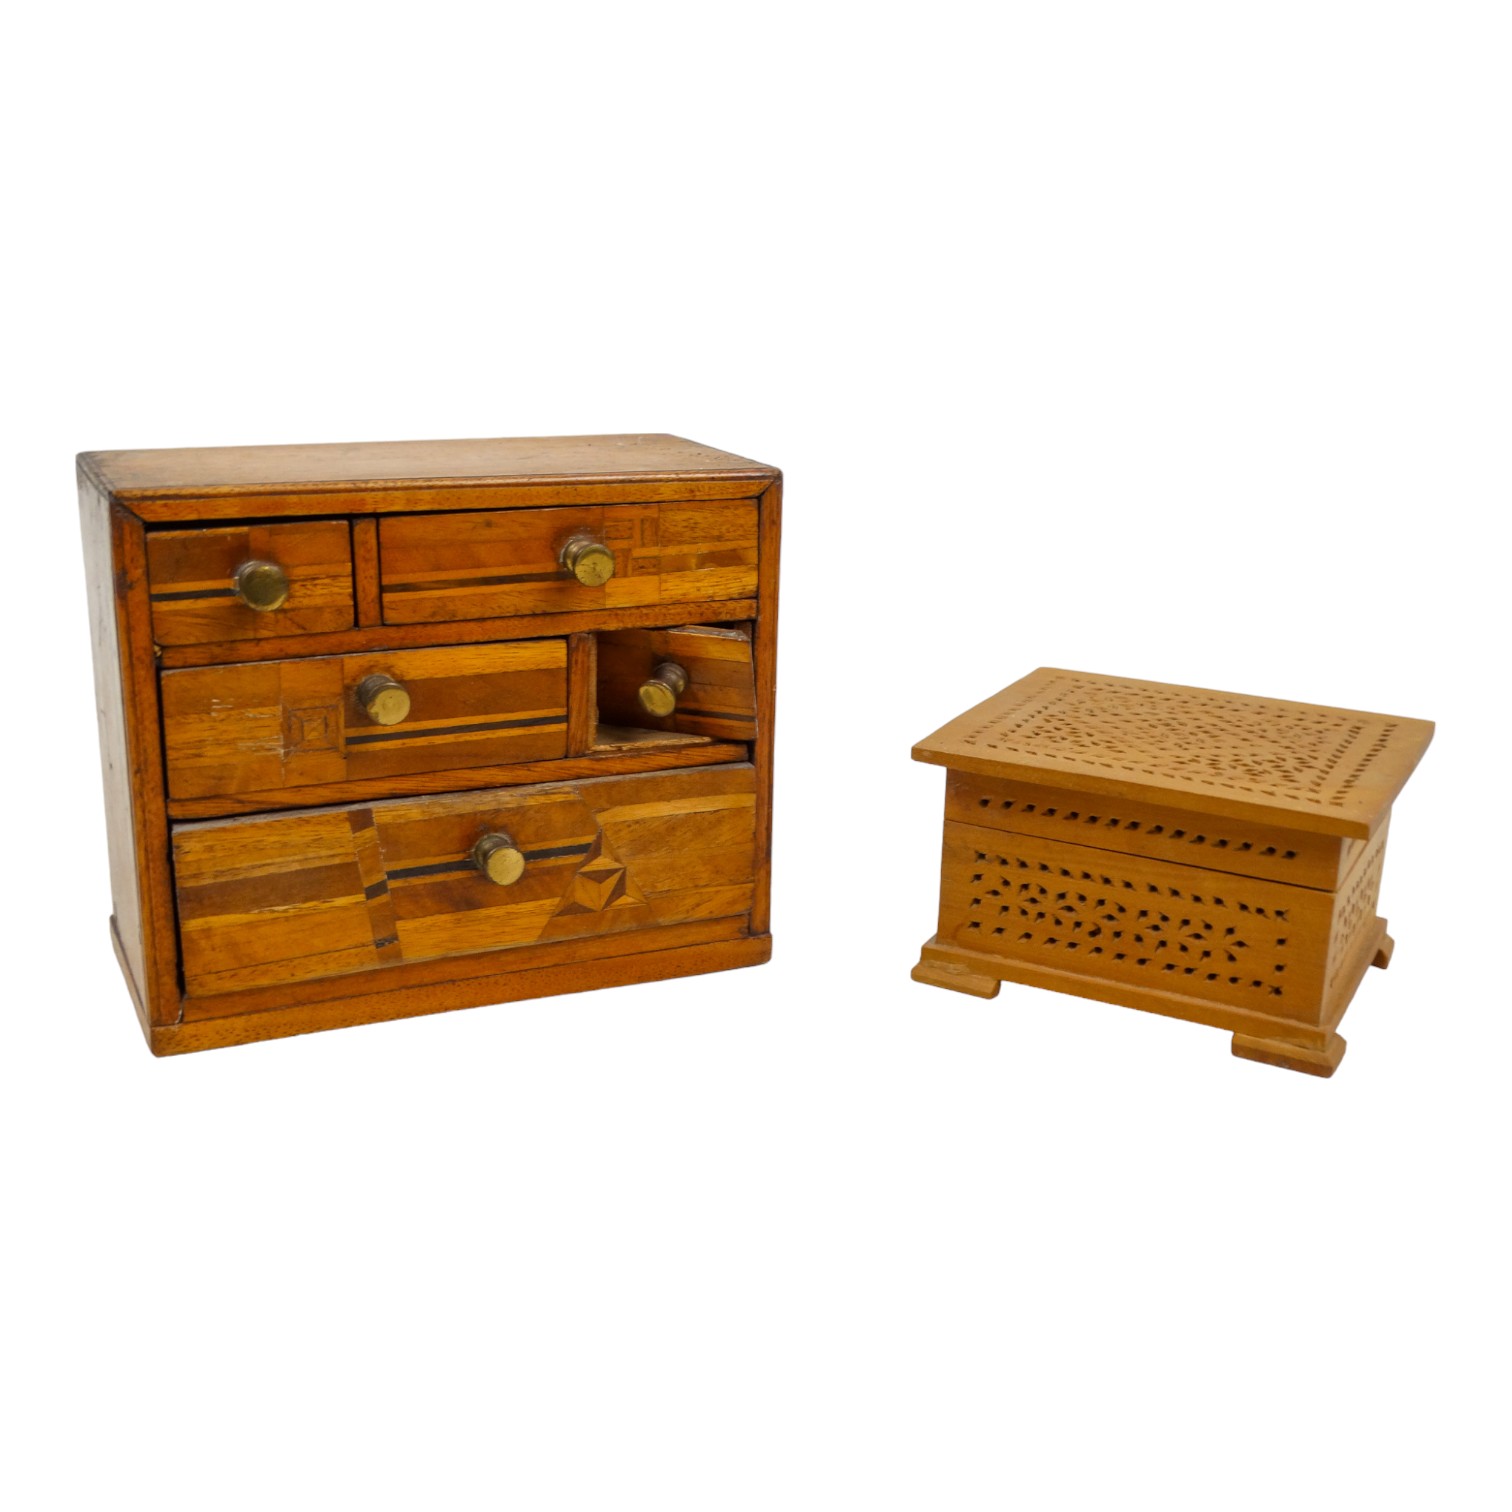 A late 19th century miniature chest - with asymmetrical inlay to drawers, 14cm wide